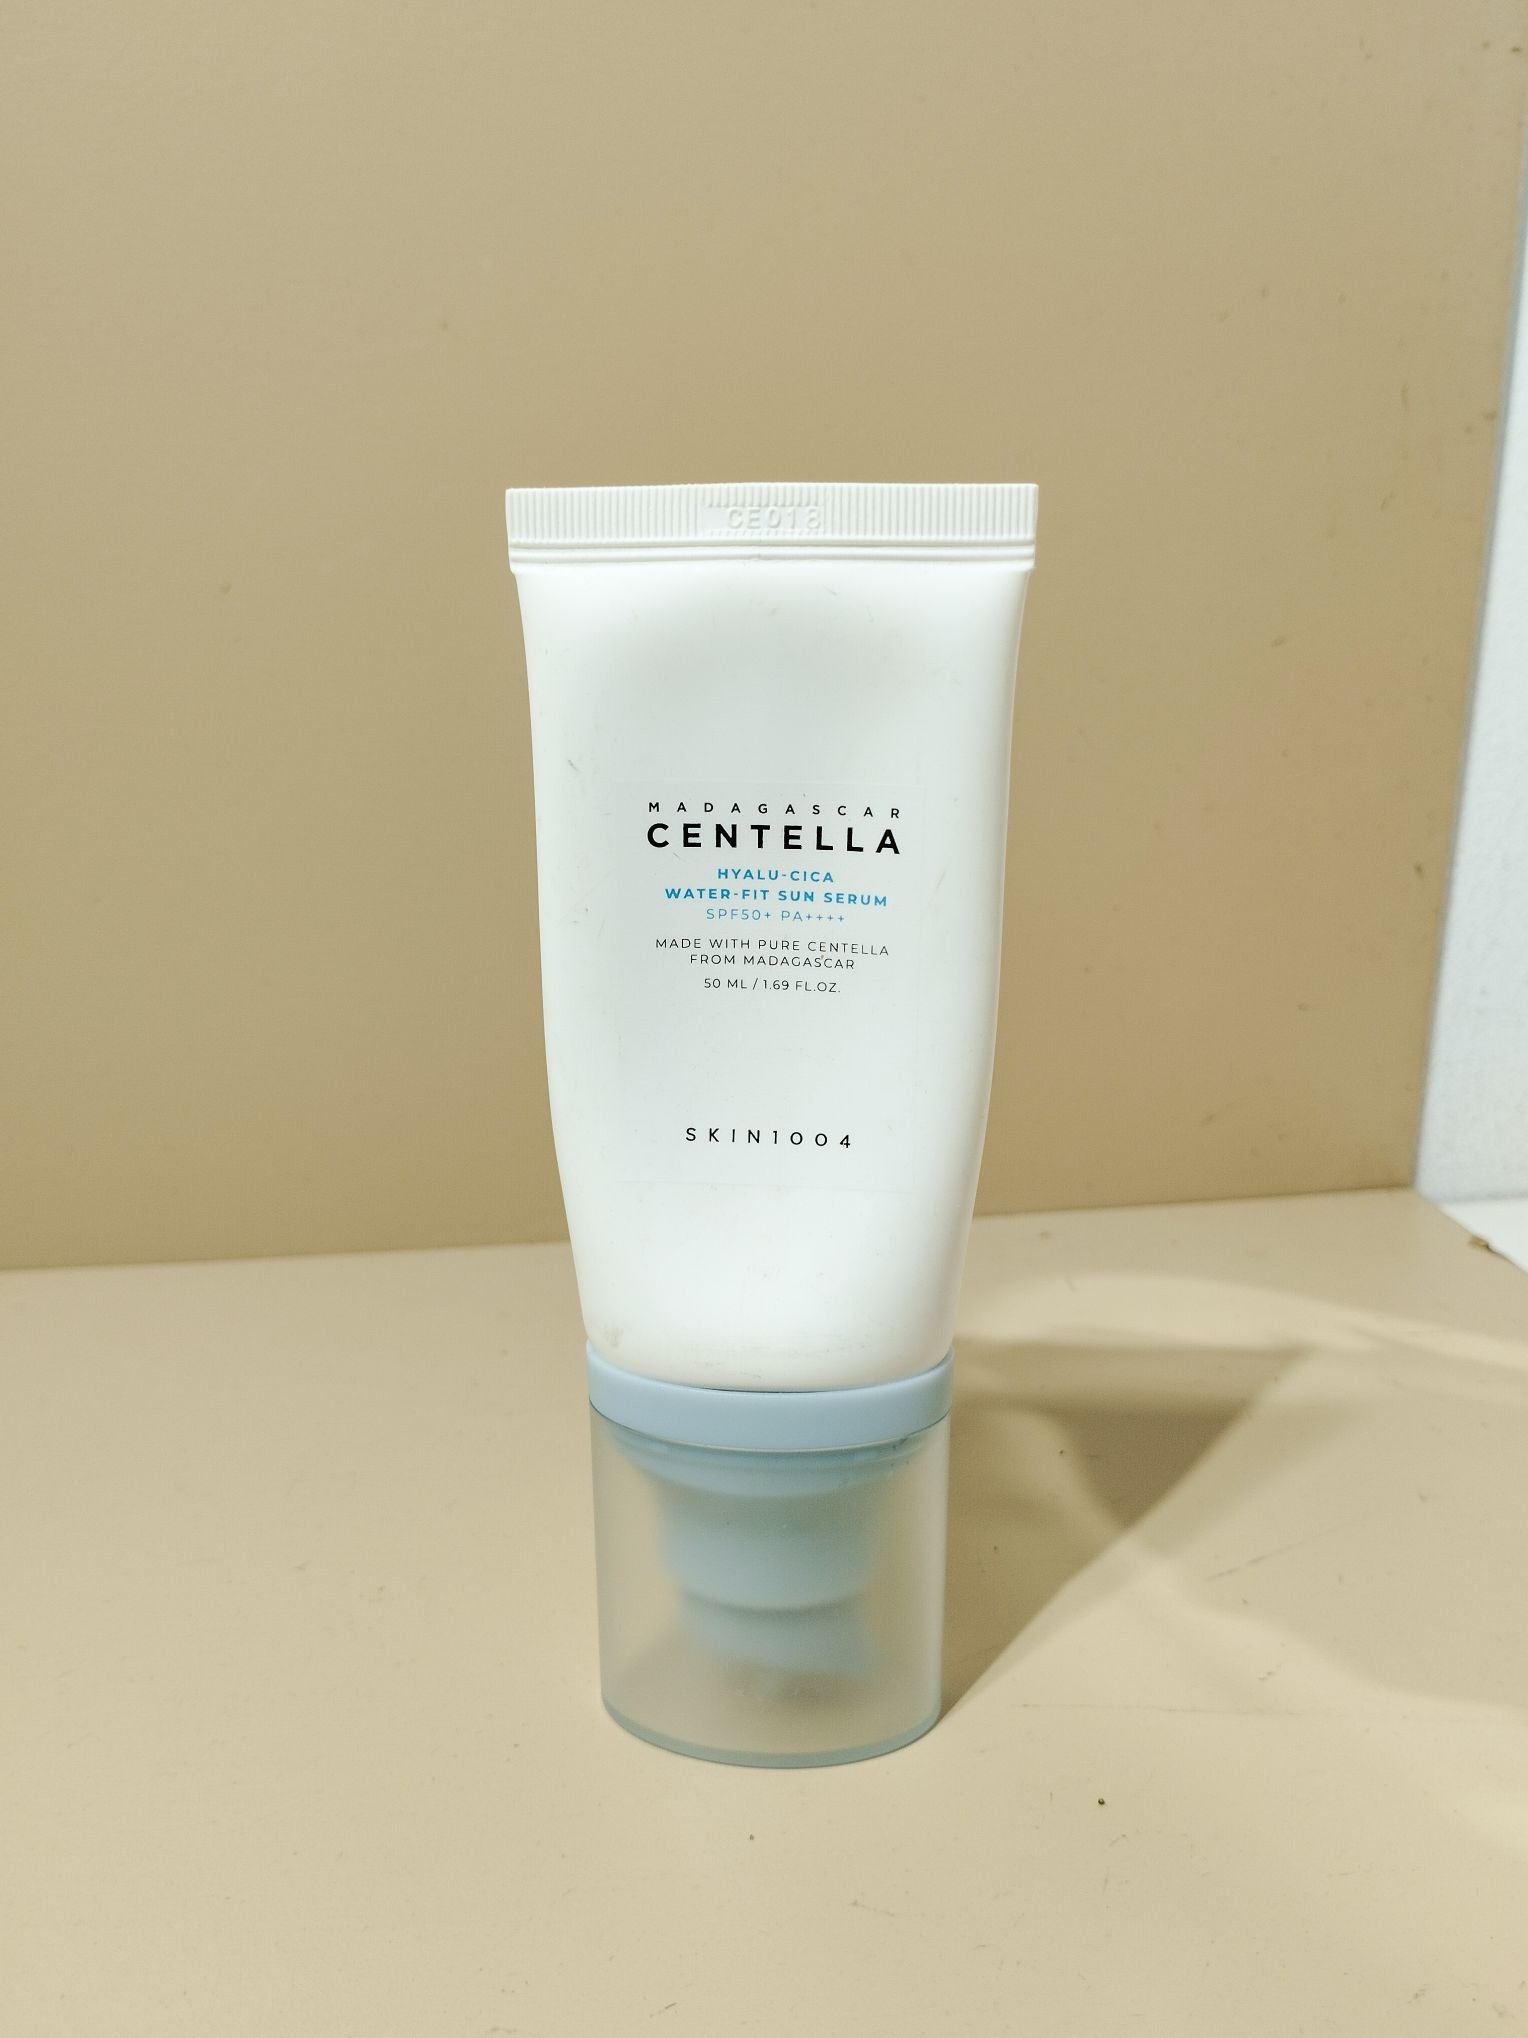 Review Skin1004 Centella Hyalu-Cica Sunscreen by theblackdaisies